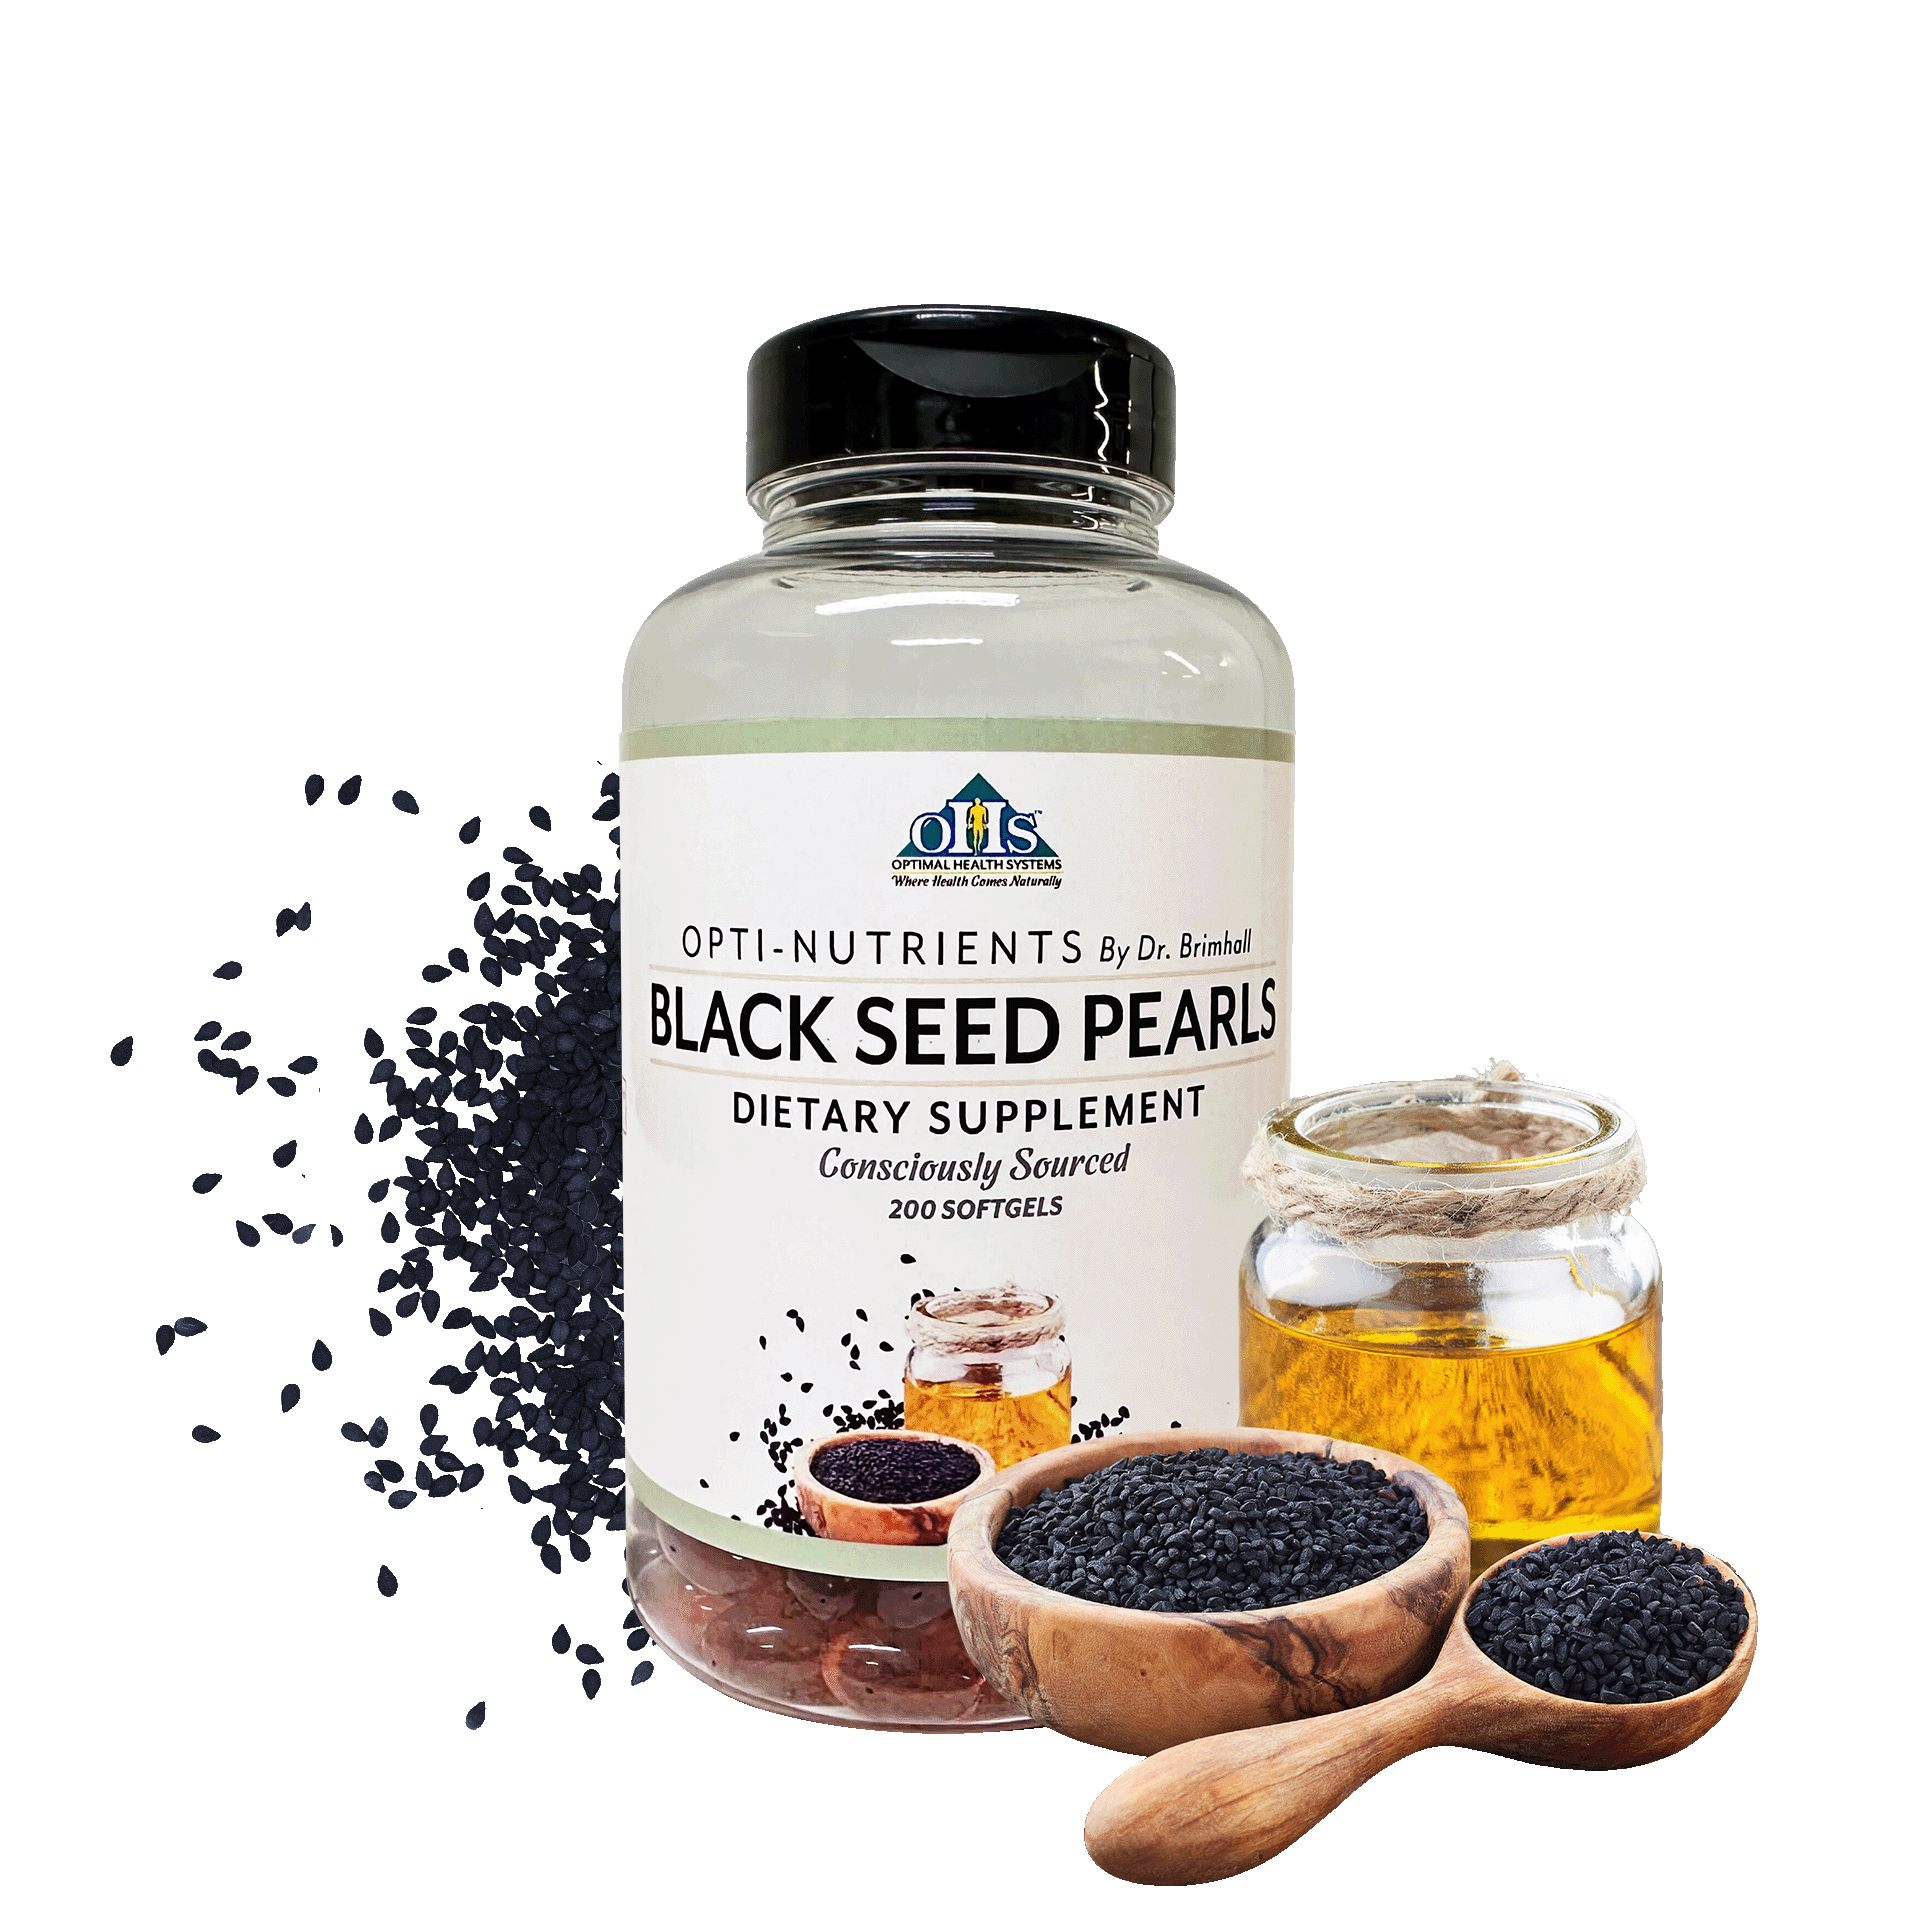 Image of a bottle of Opti Black Seed Pearls. Around the bottle are black seeds and a jar of black seed oil.